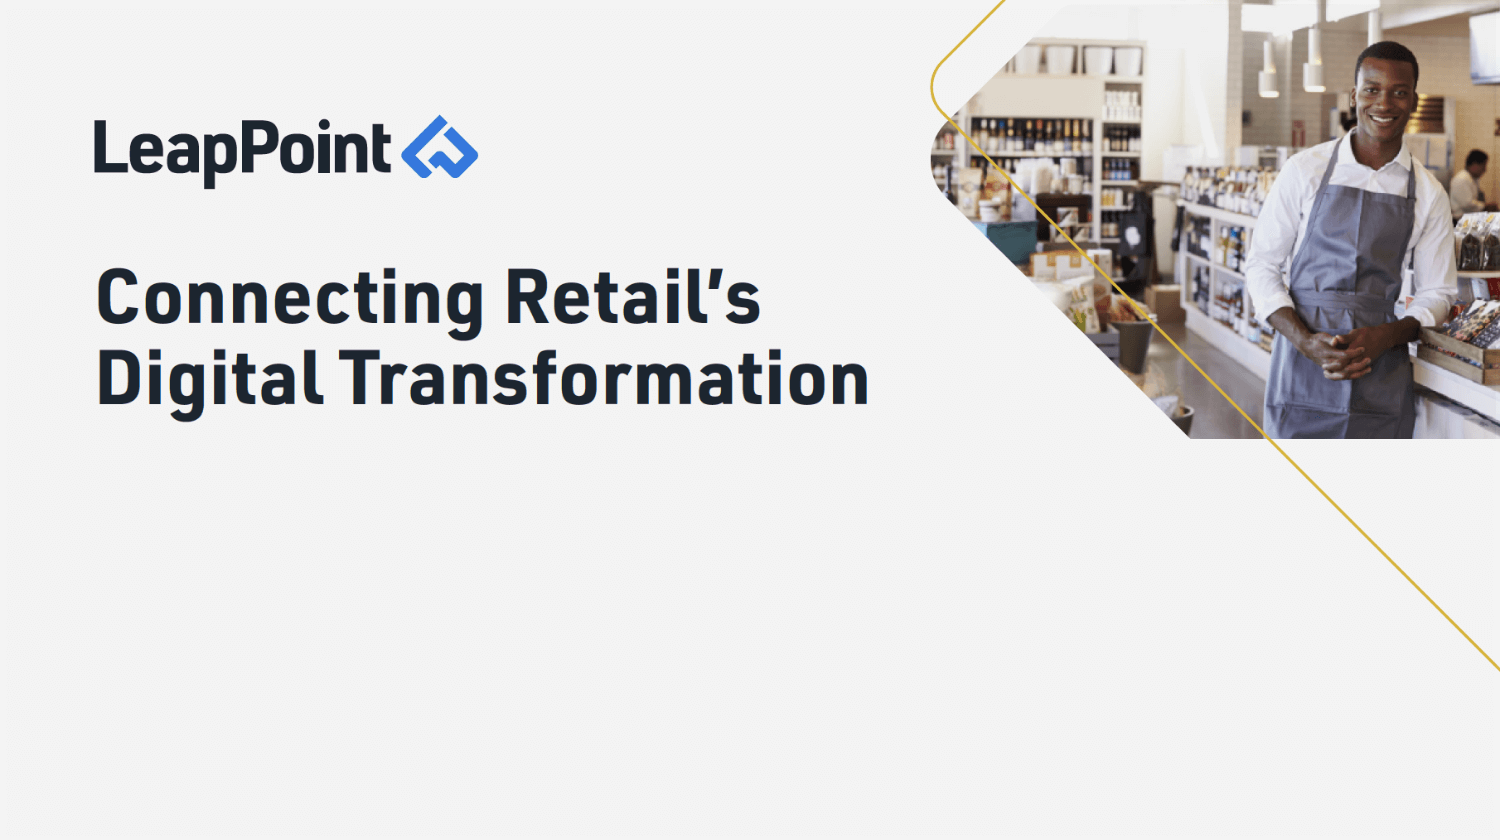 LeapPoint connecting retail's digital transformation